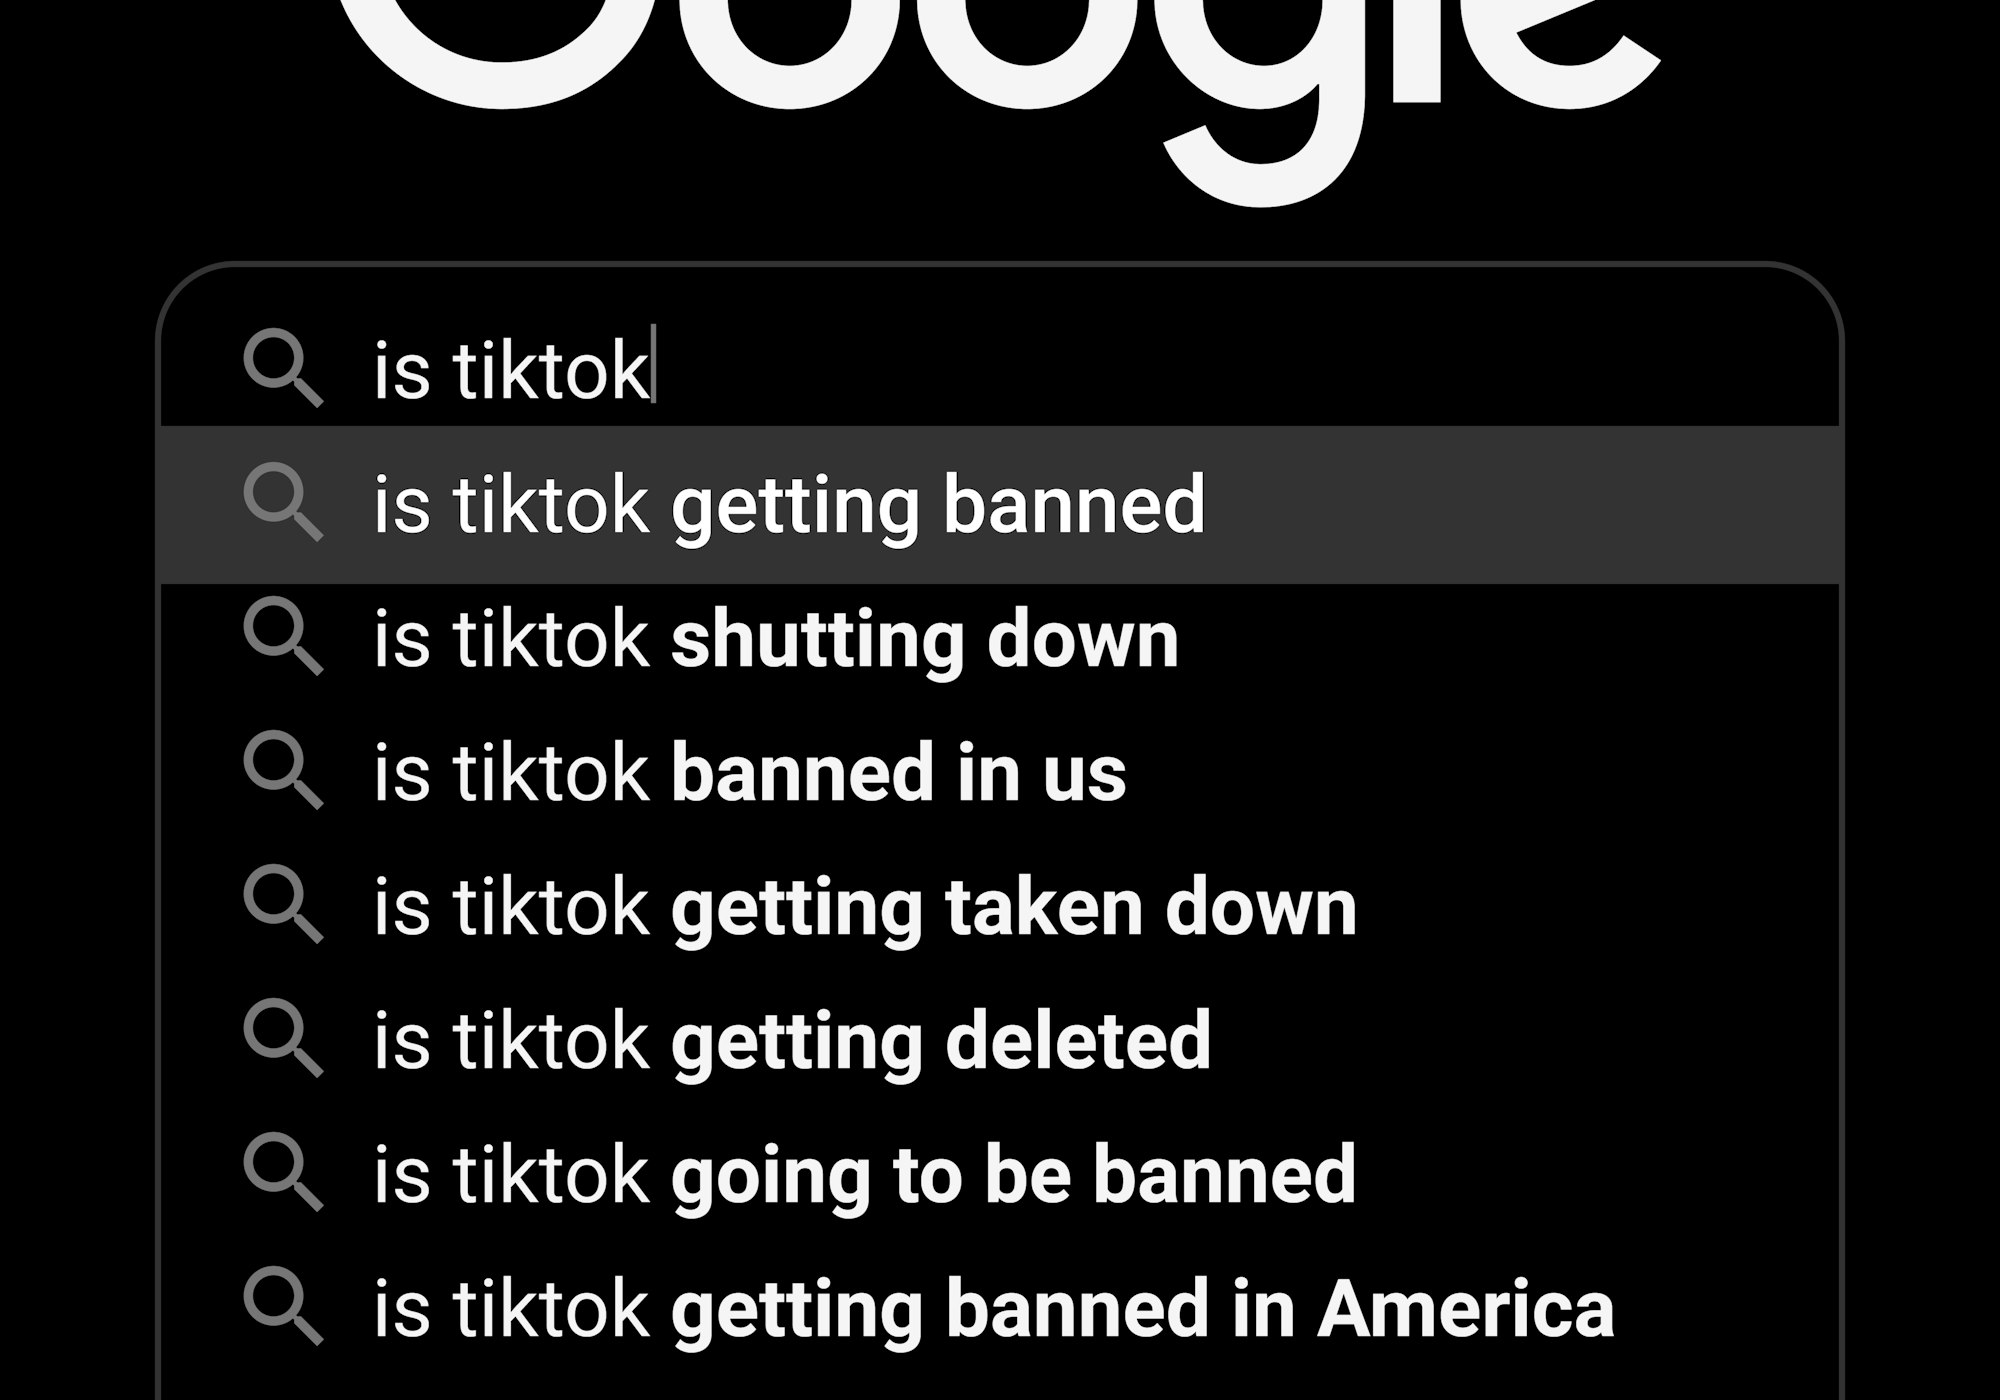 TikTok faces a potential permanent ban in the US